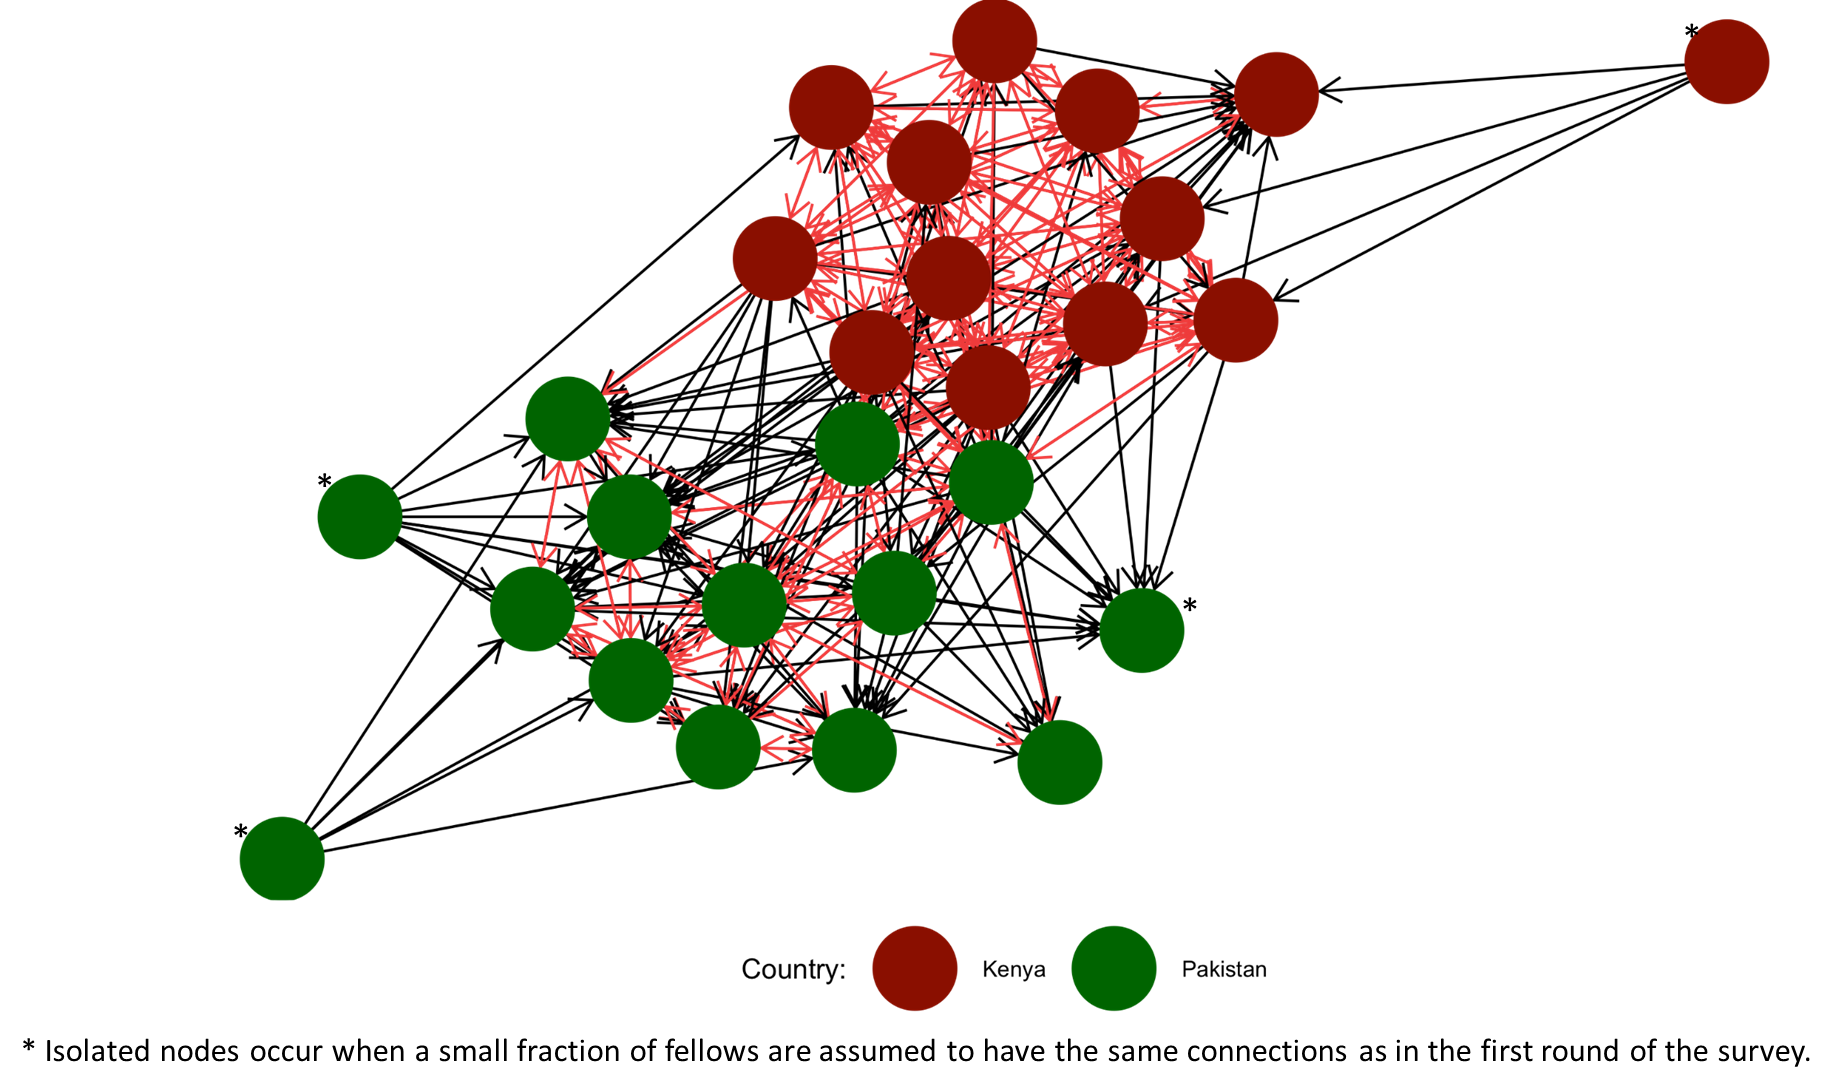 Diagram showing number of connections after South-South programme